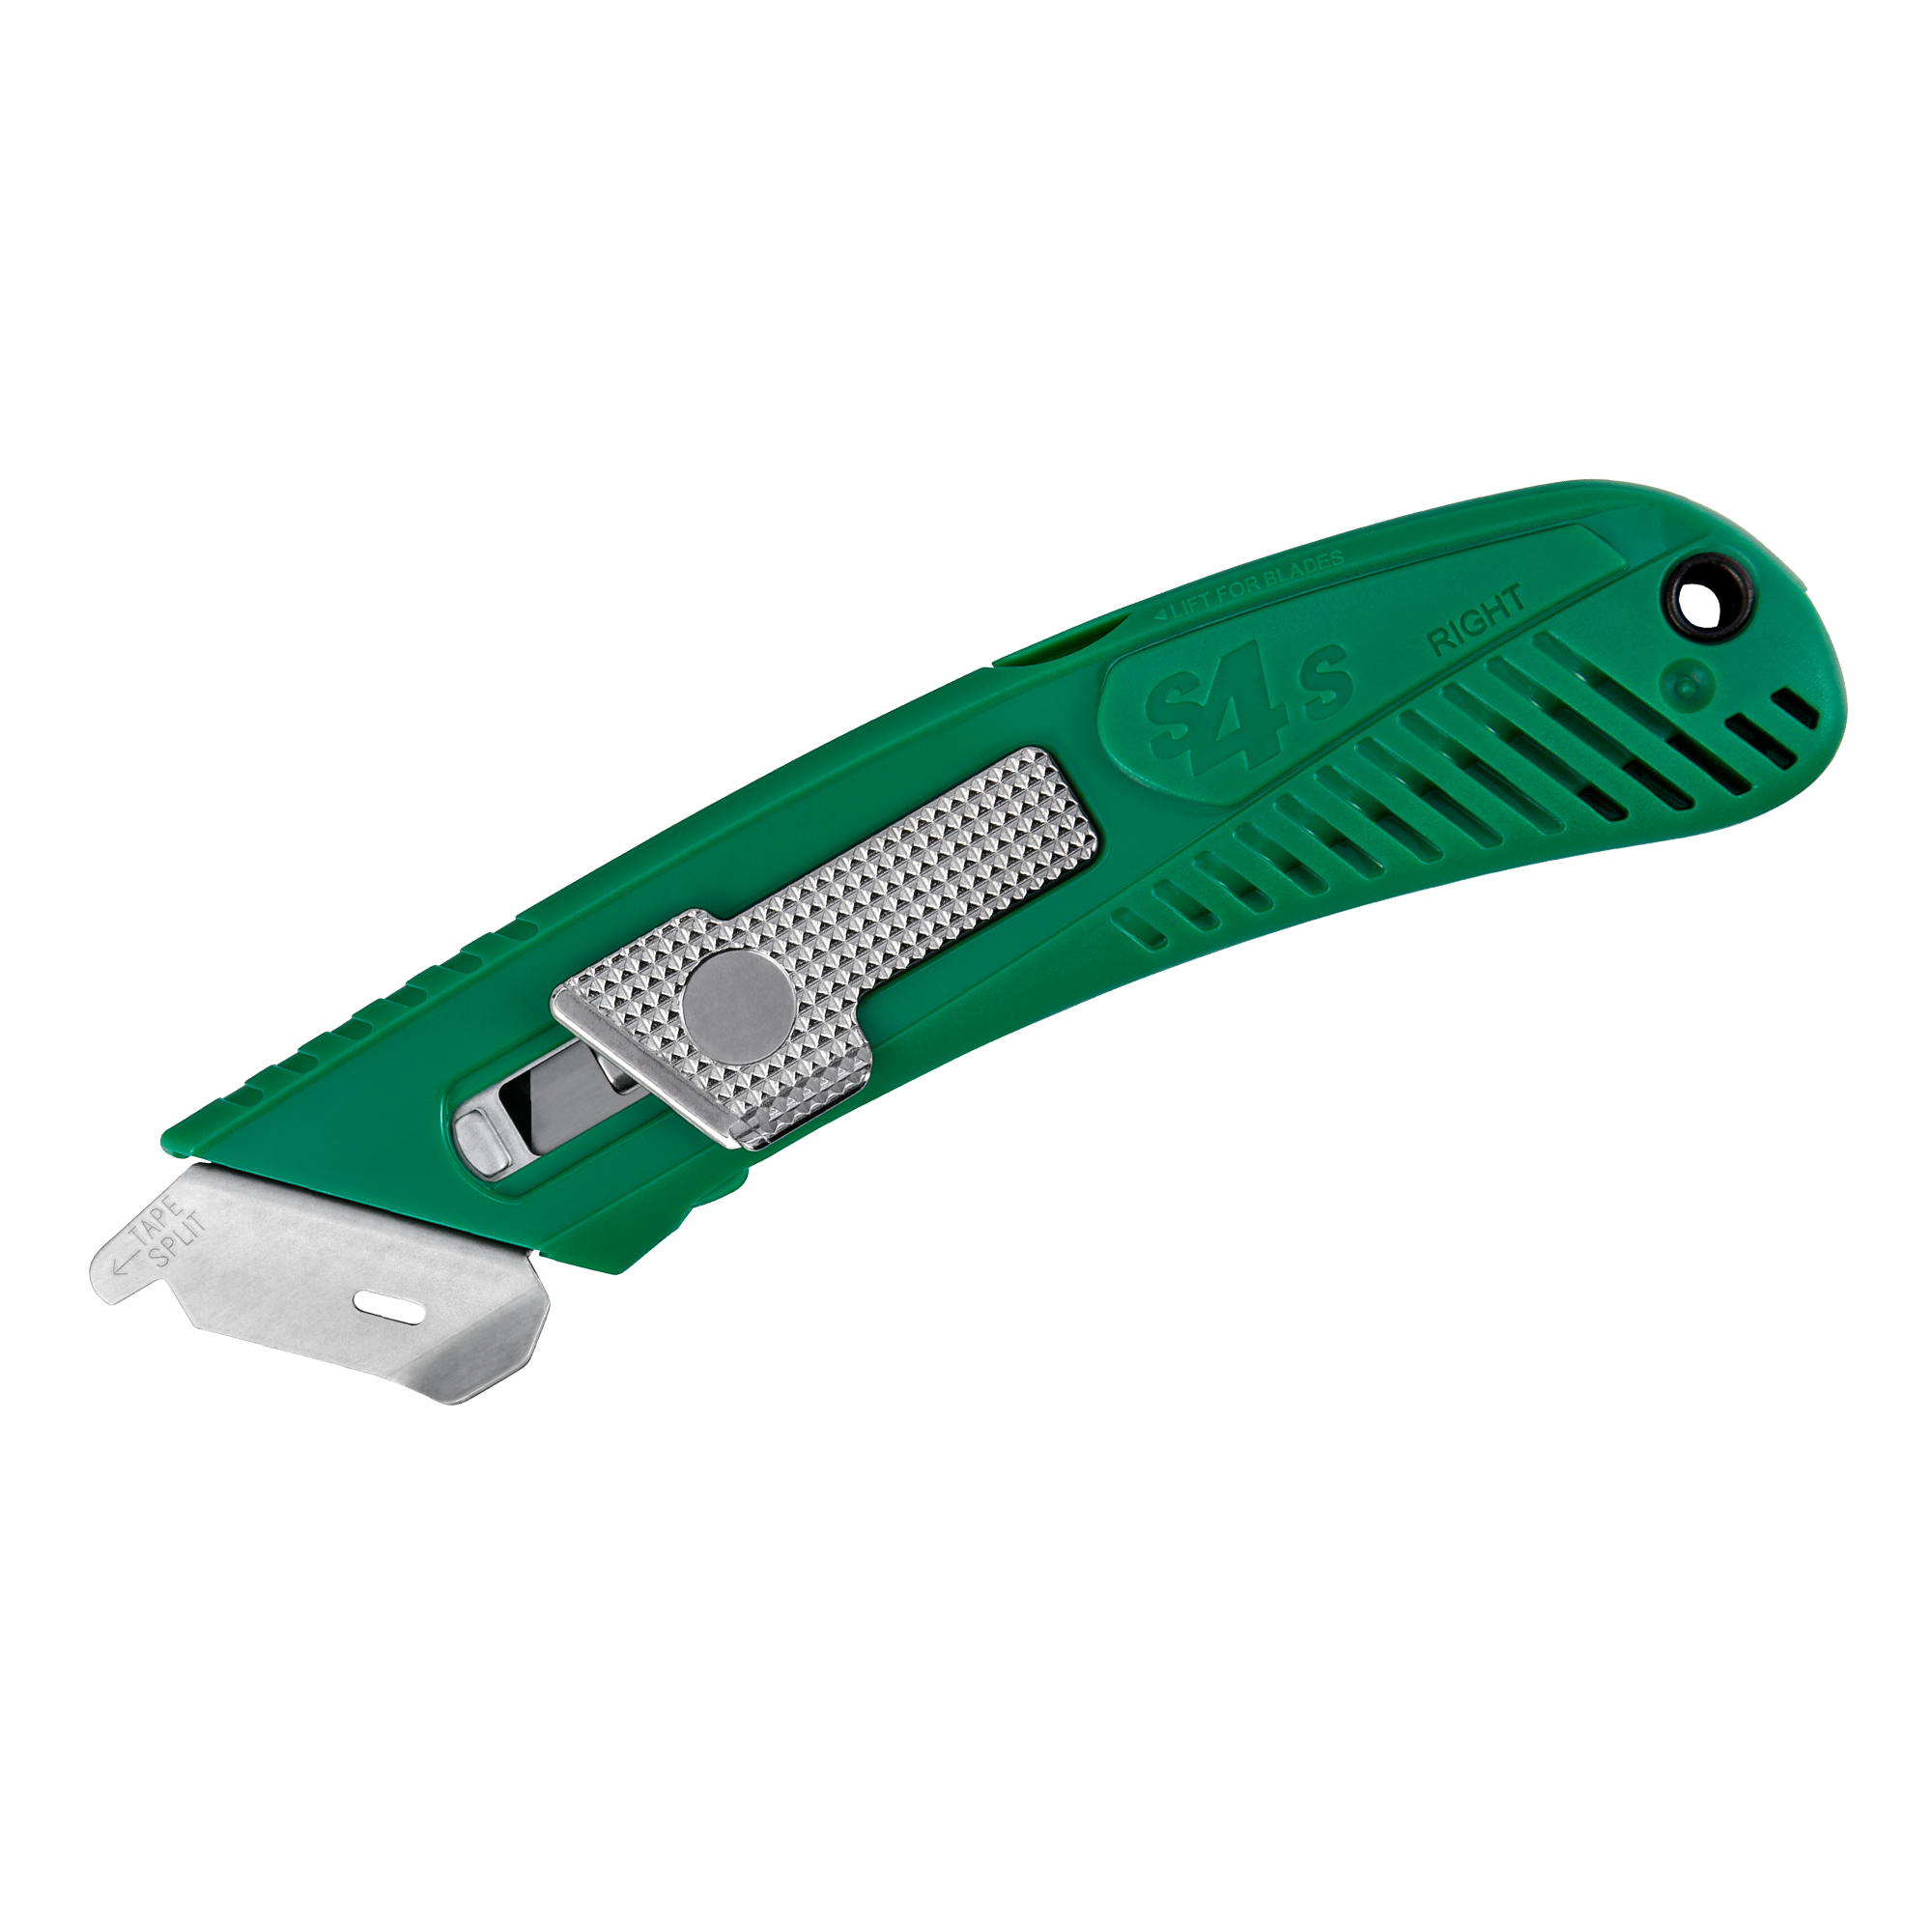 S4SR™ Guarded Auto-Retract Safety Knife, Right-Handed - Pacific Handy Cutter